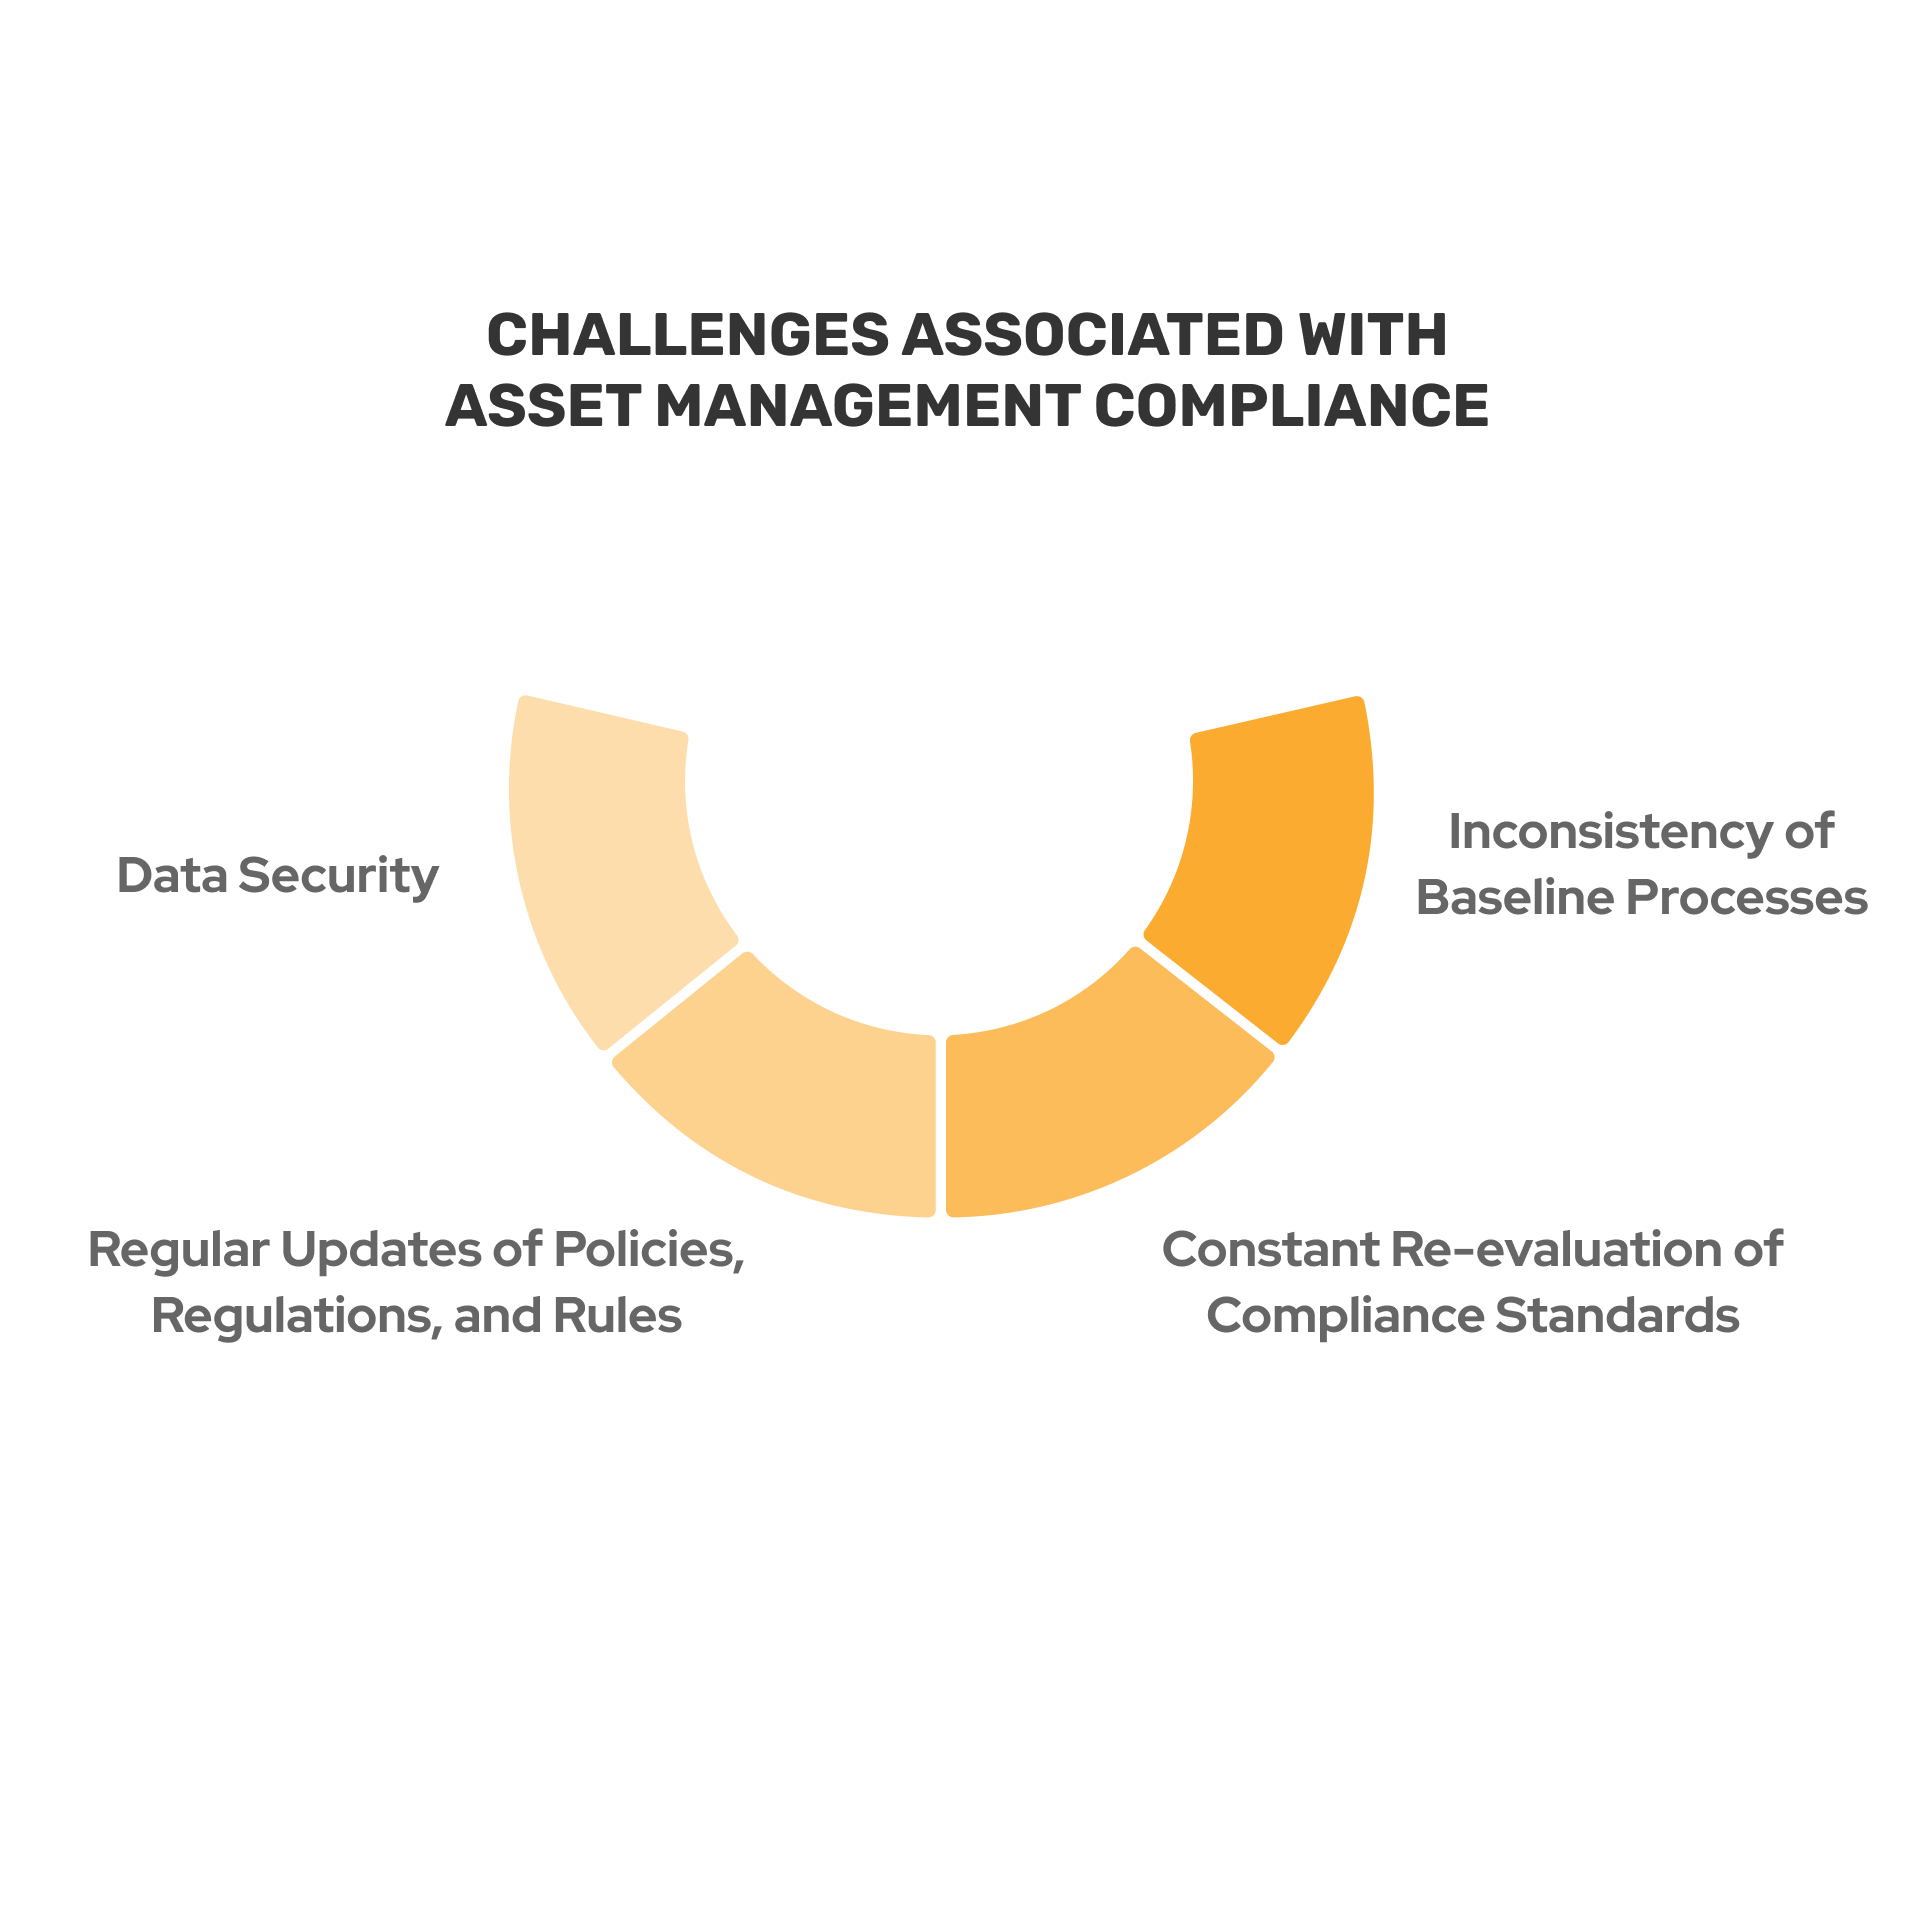 Asset management compliances come with serious challenges, be it regular updates of internal policies, data security, or inconsistent baseline processes.